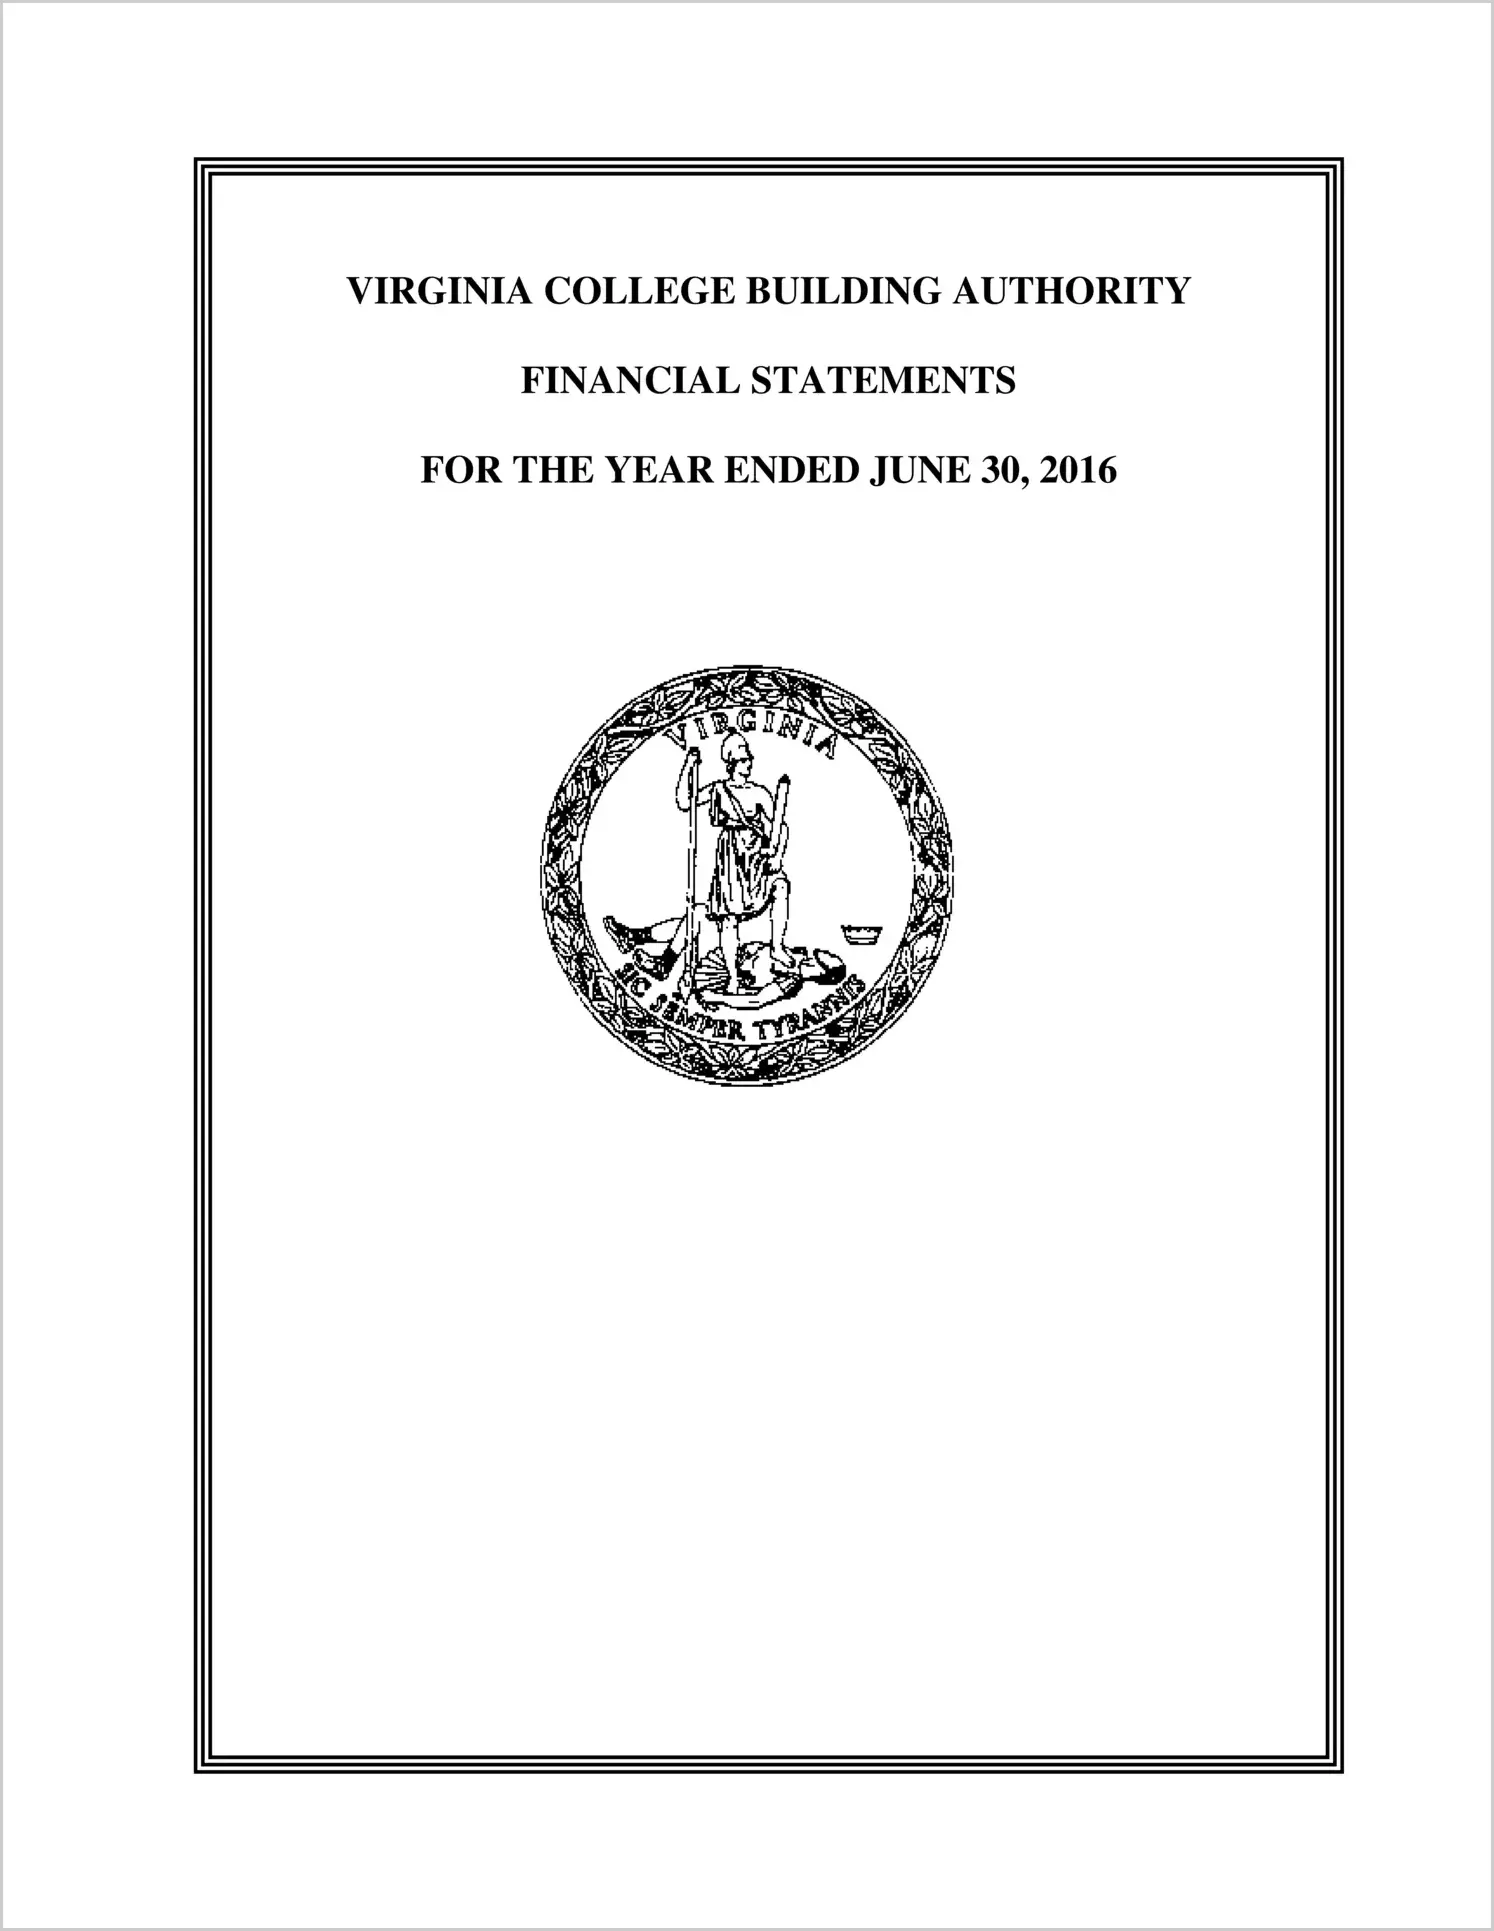 Virginia College Building Authority Financial Statements for the Year Ended June 30, 2016